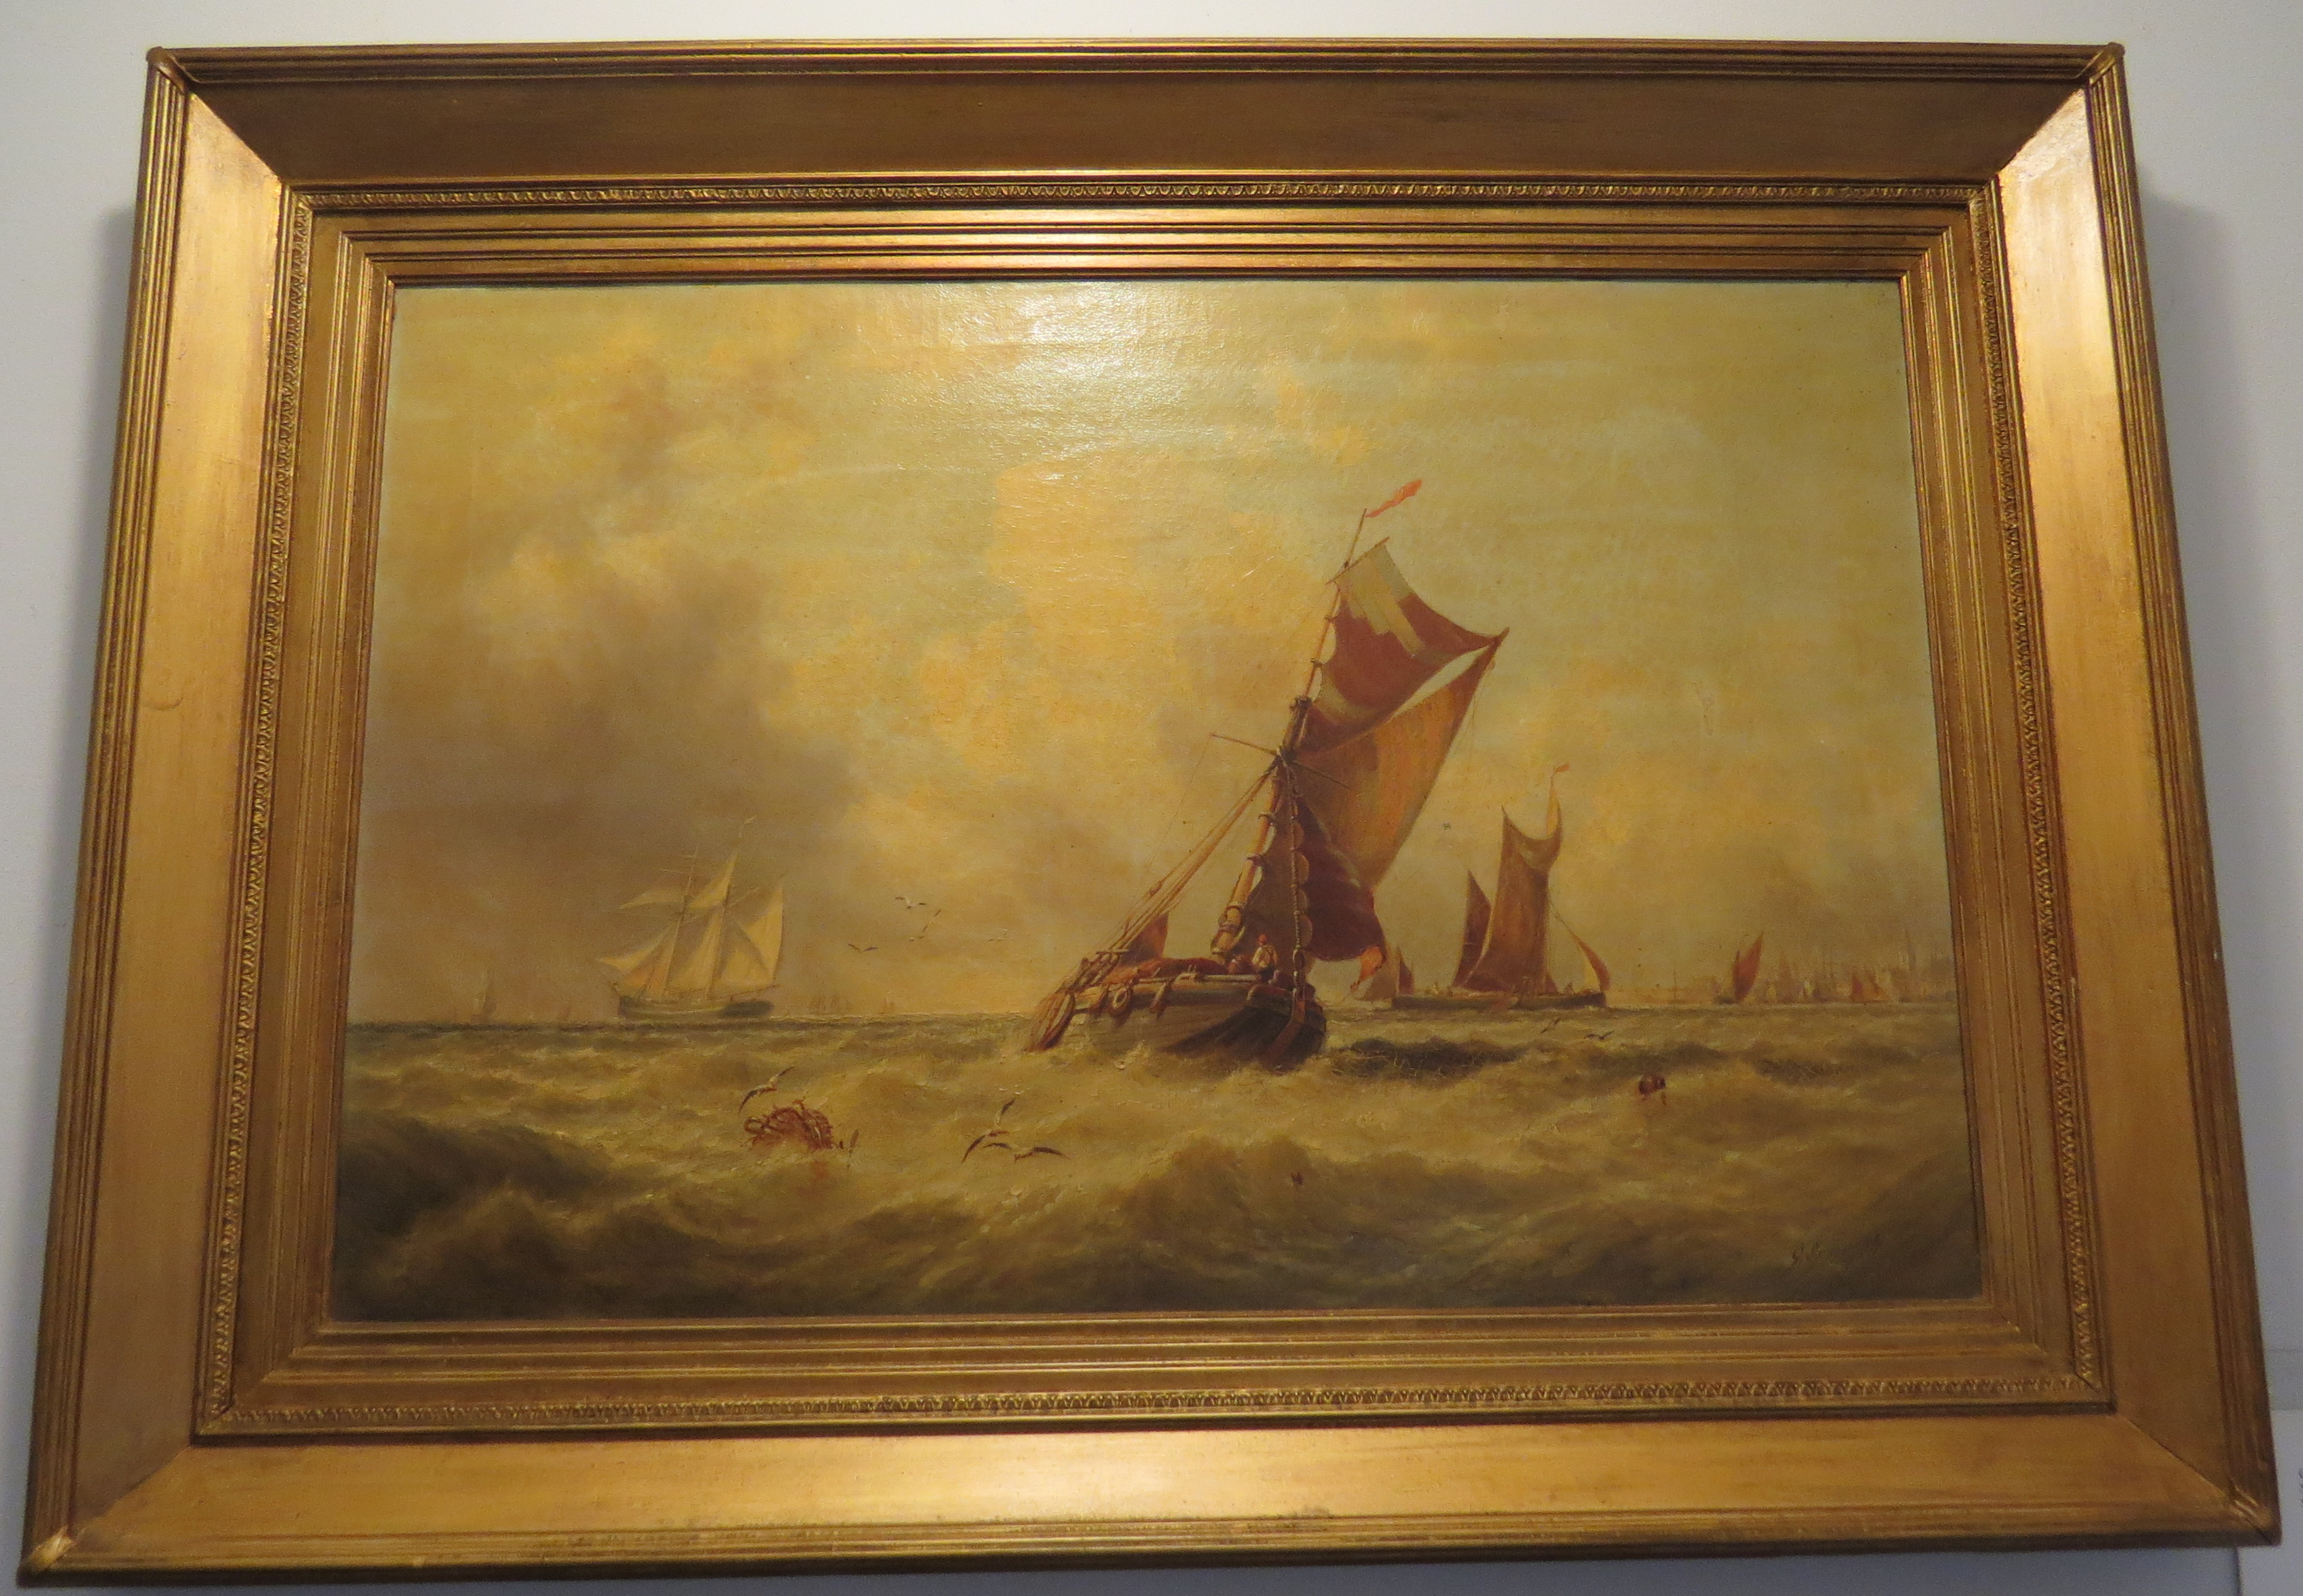 Oil on Canvas of an English Nautical Scene; Signed “J. Stainton”